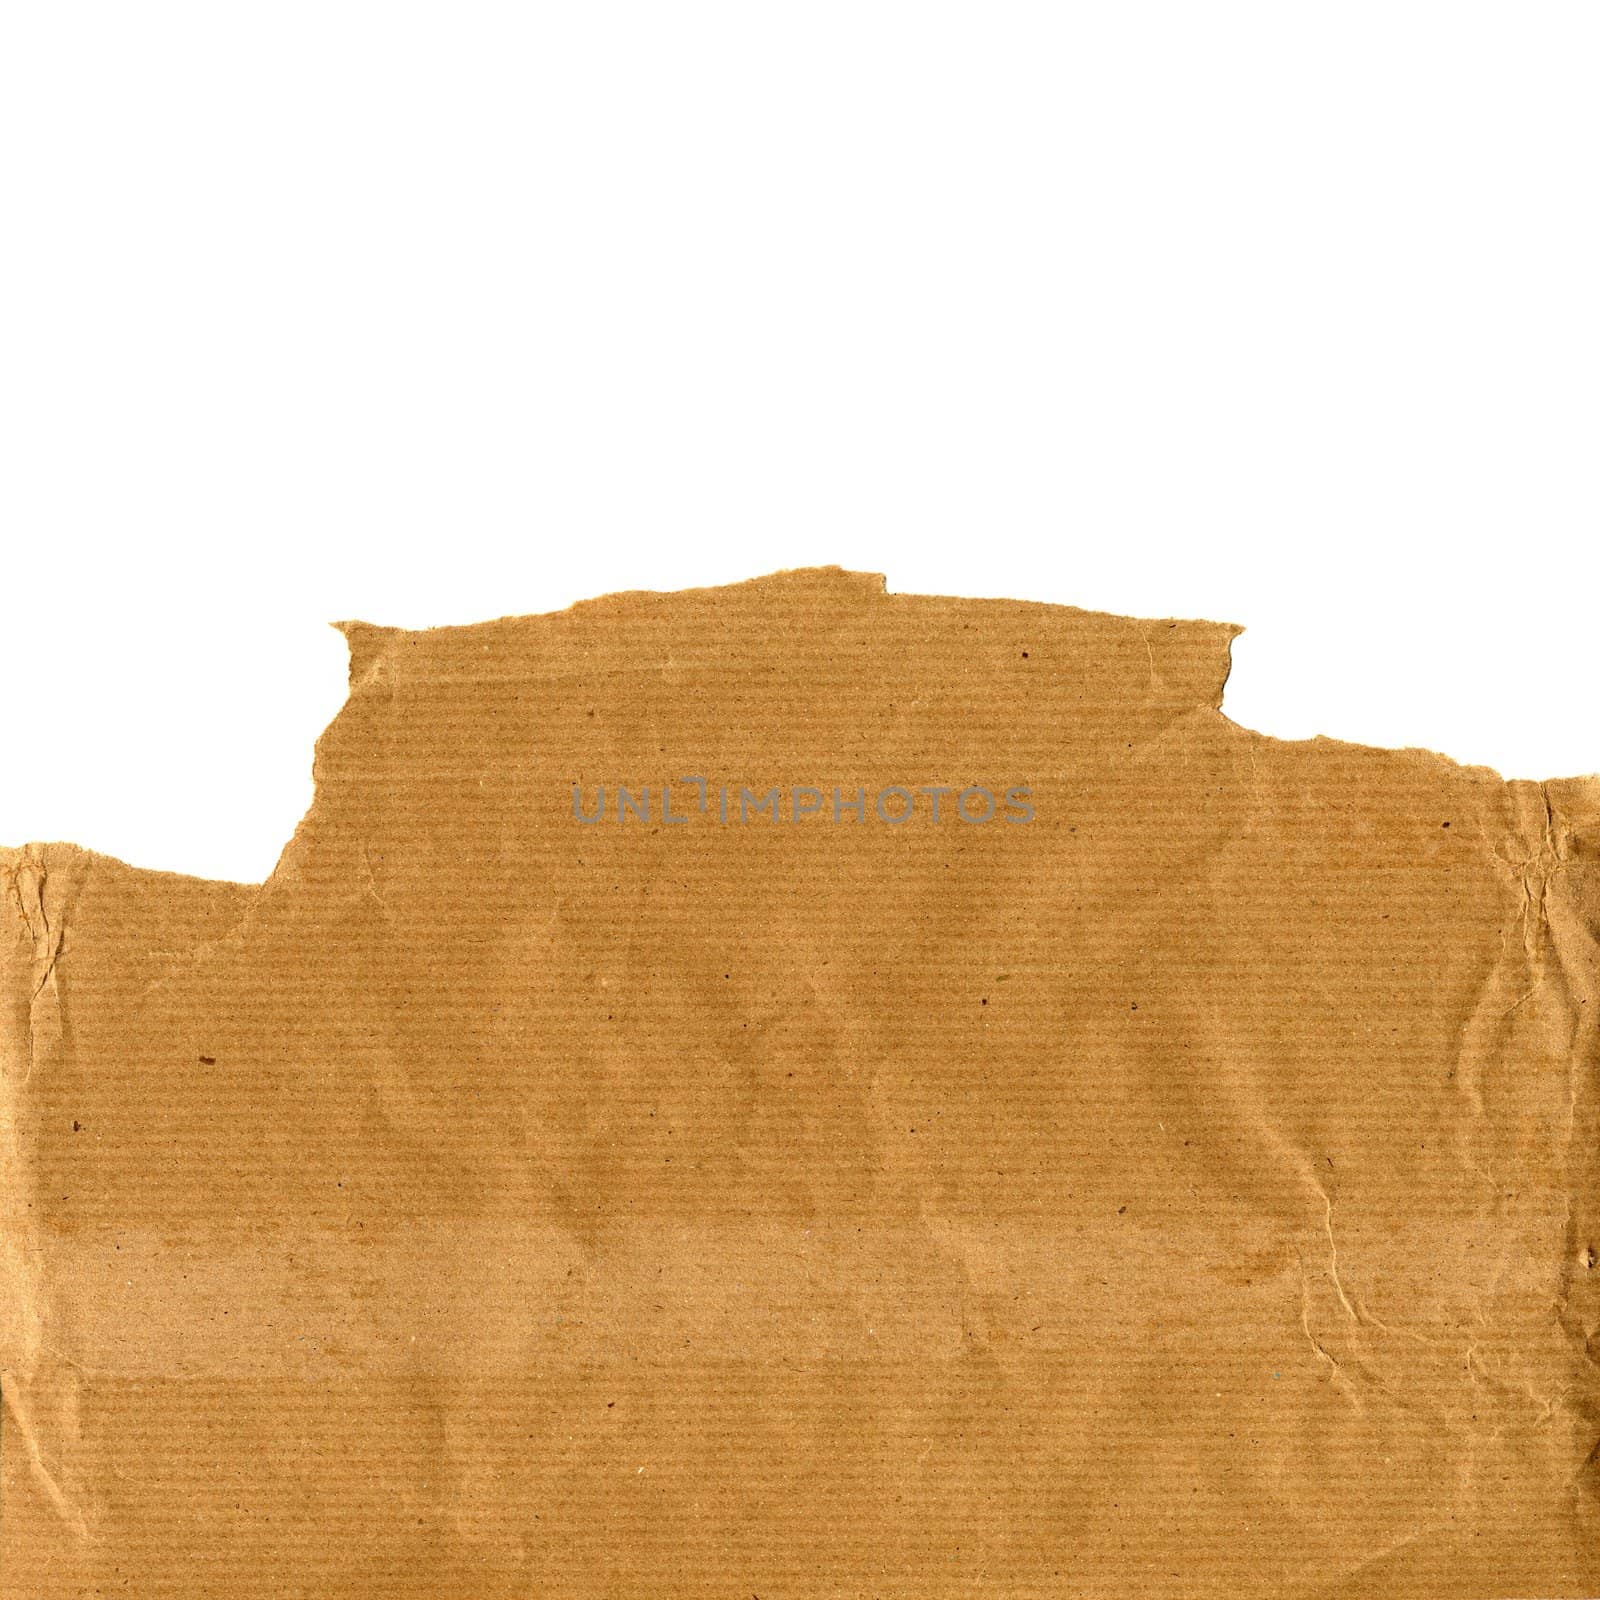 Brown paper background by paolo77